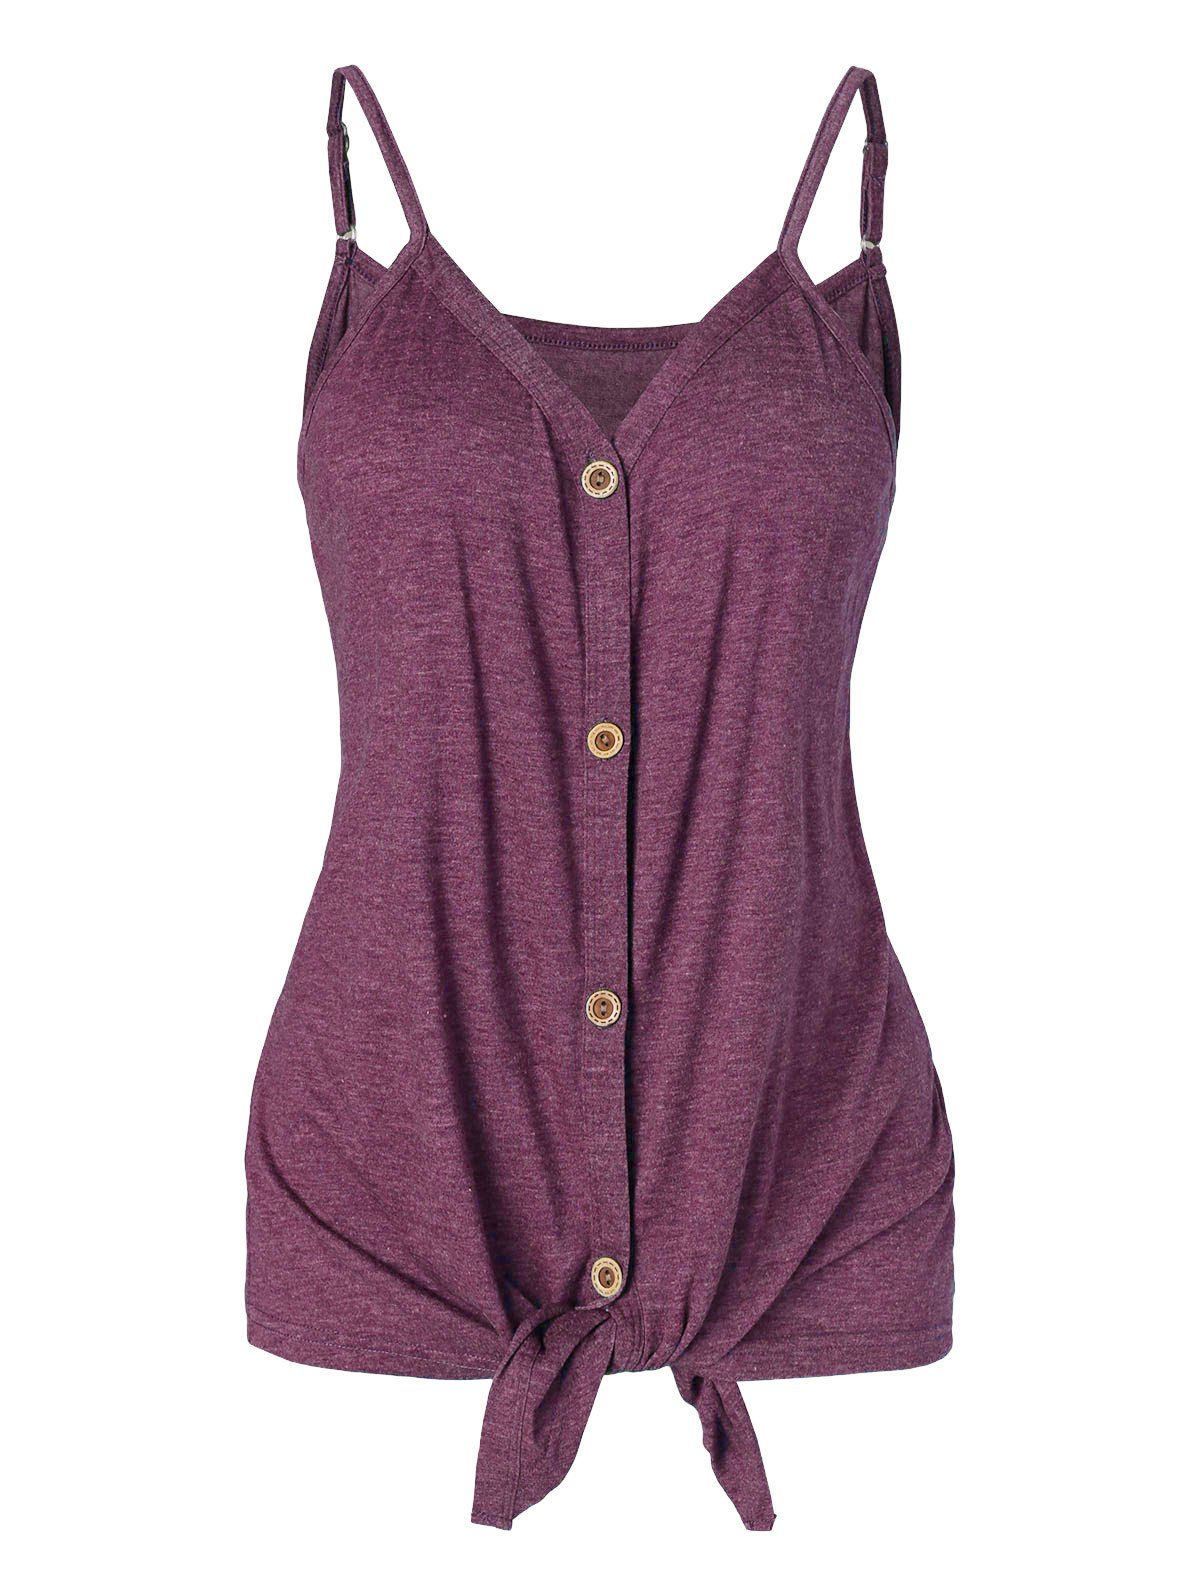 Button Up Front Tied V Neck Strappy Heathered Camisole - PURPLE S